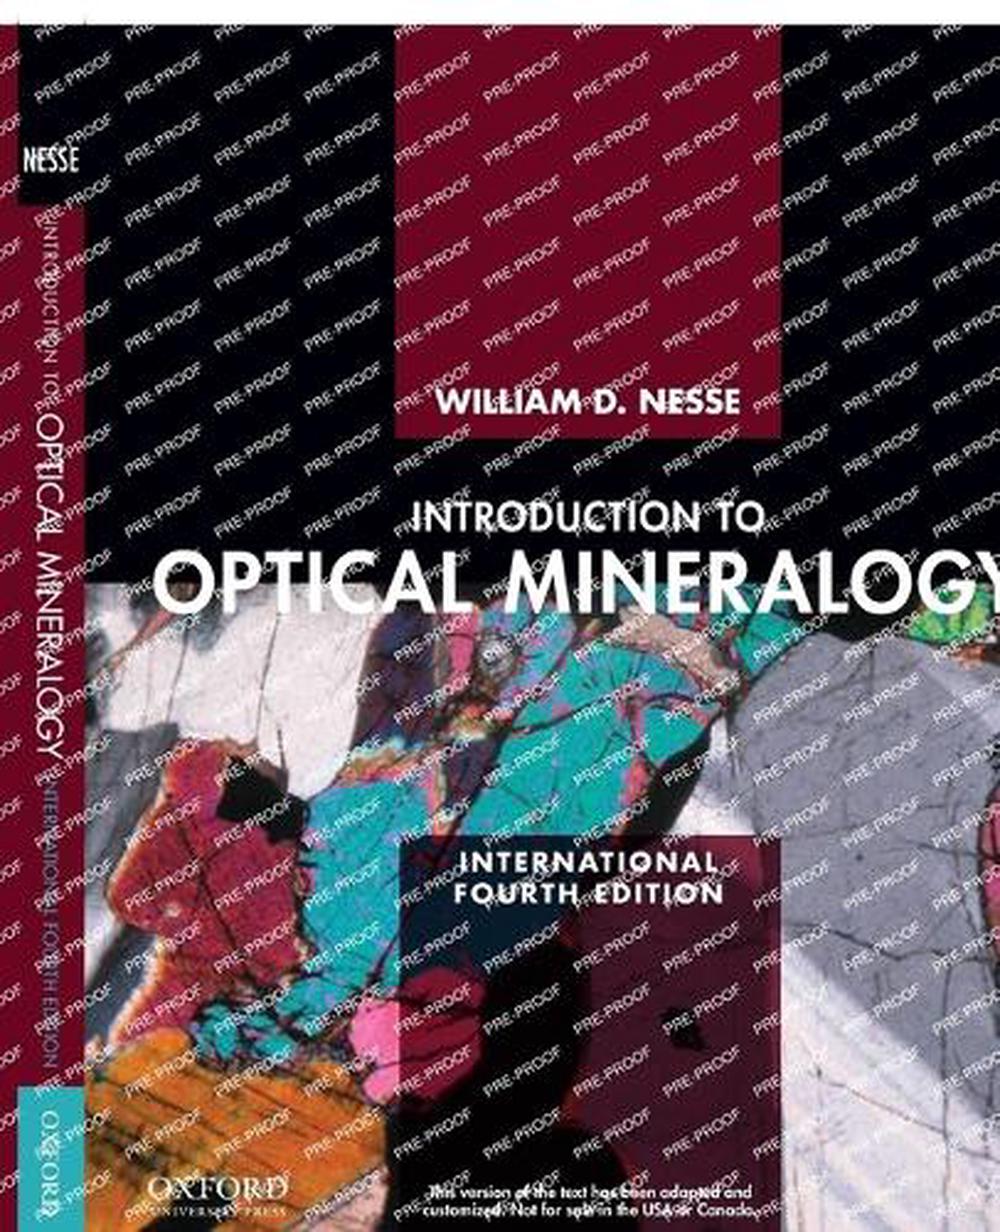 introduction to mineralogy nesse pdf free download